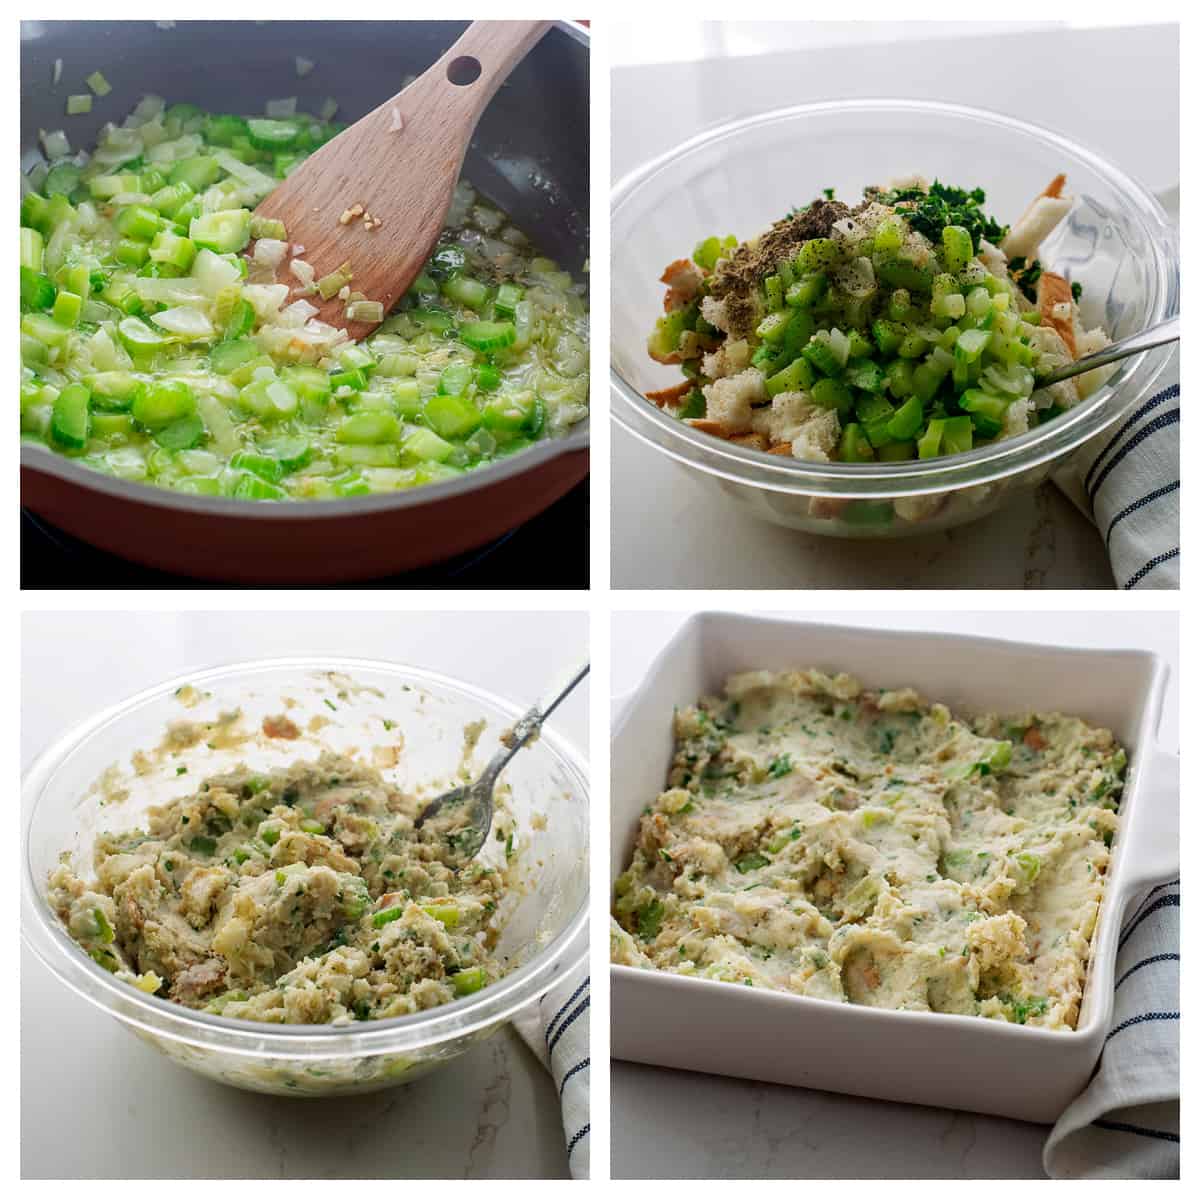 Collage showing how to make mashed potato stuffing.